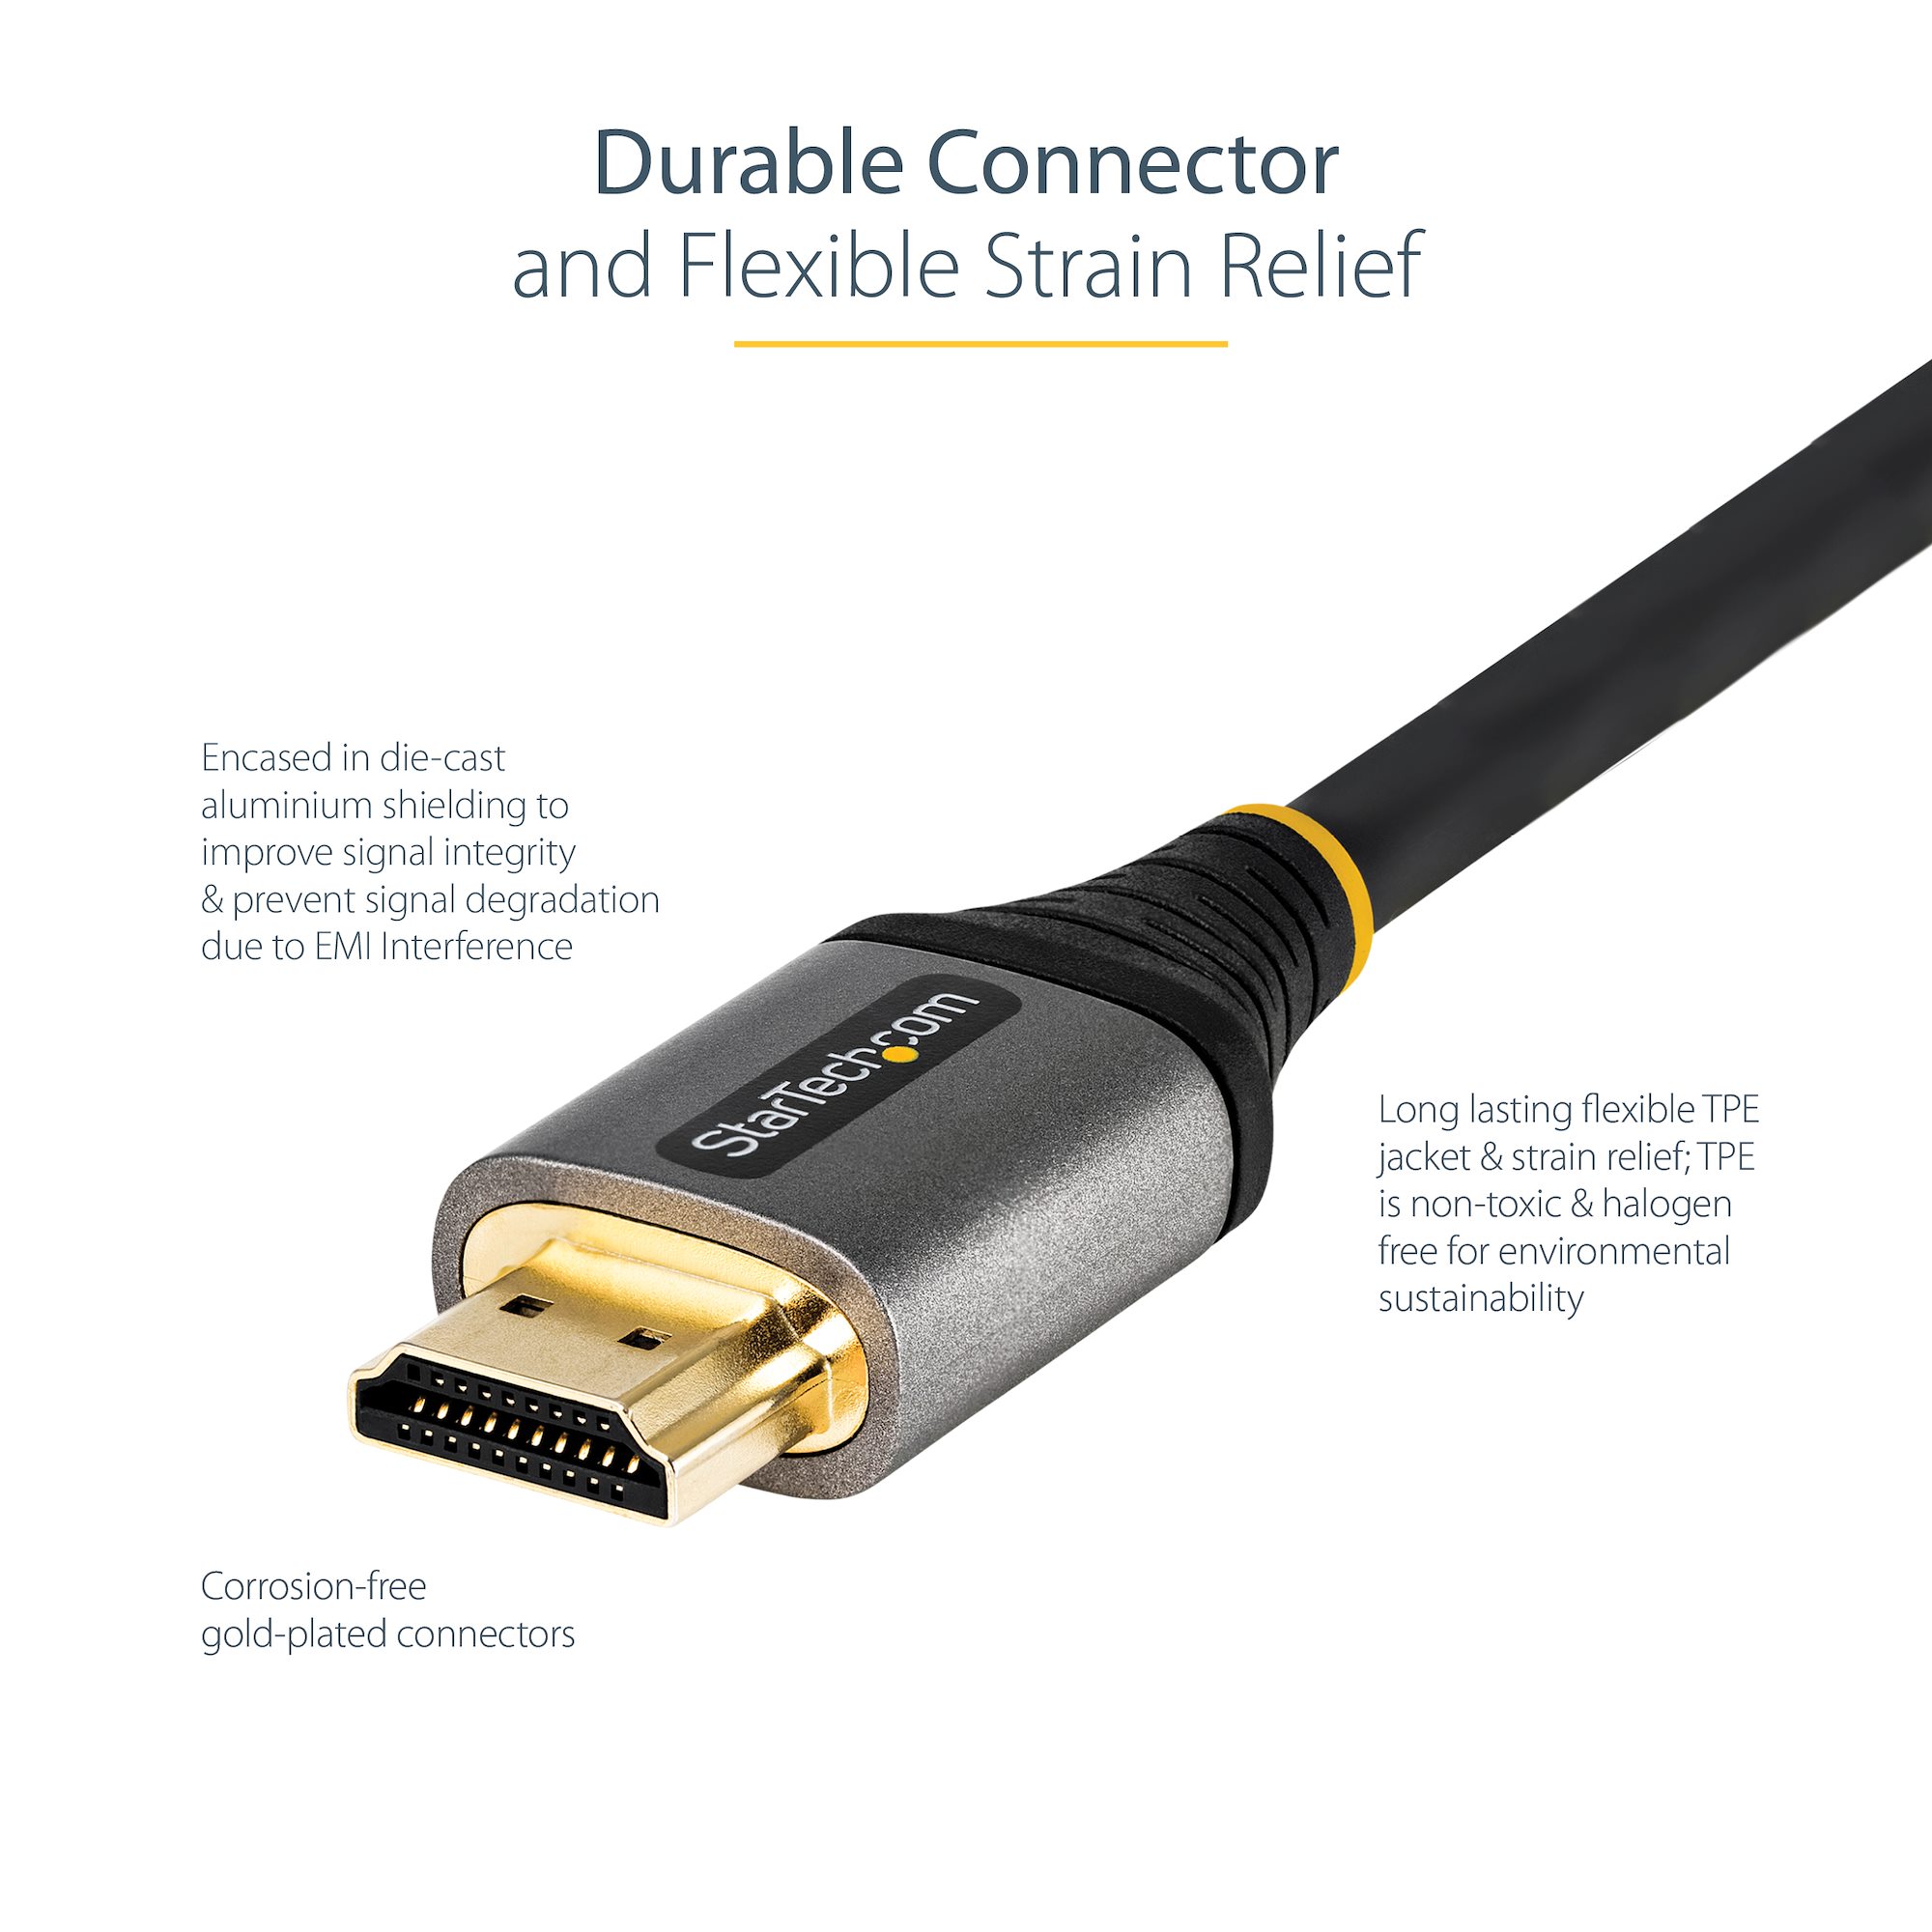 6ft 2m Certified HDMI 2.1 Cable - 8K/4K - HDMI® Cables & HDMI